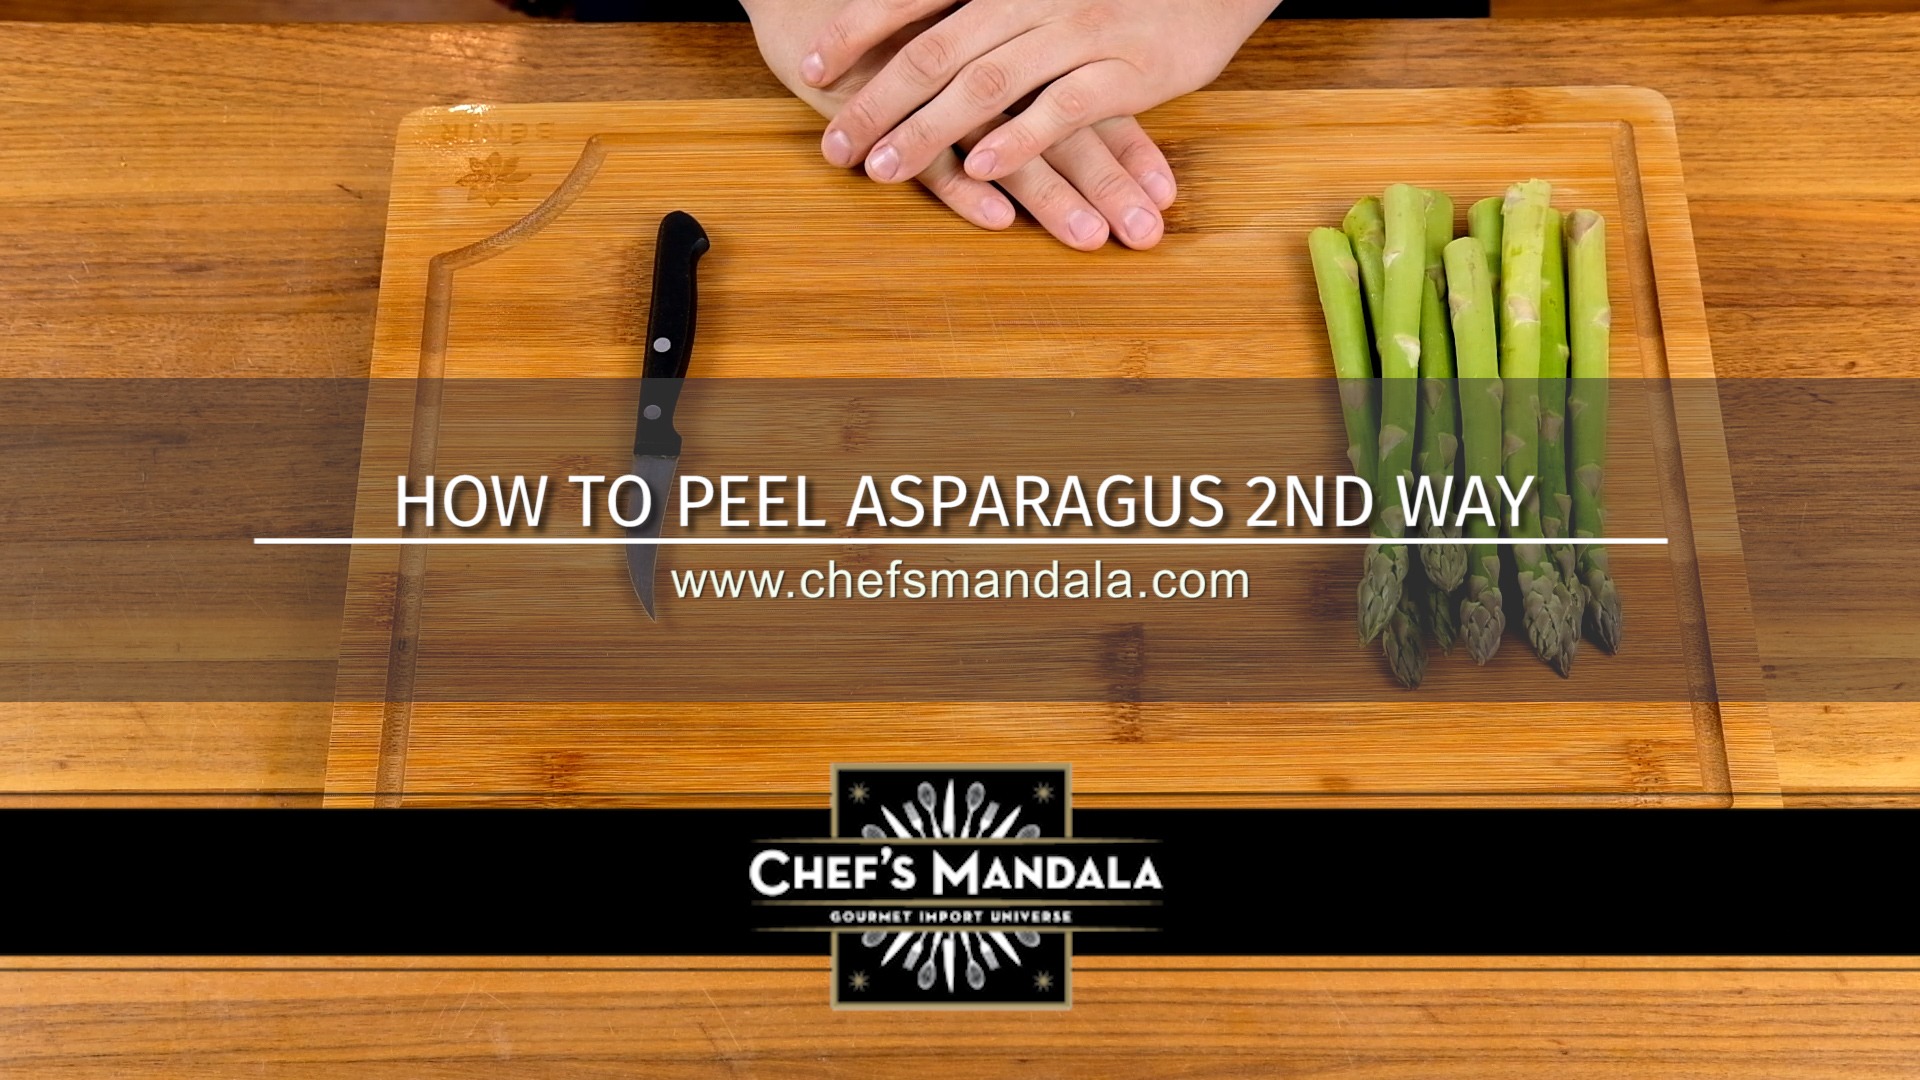 HOW TO PEEL ASPARAGUS 2ND WAY